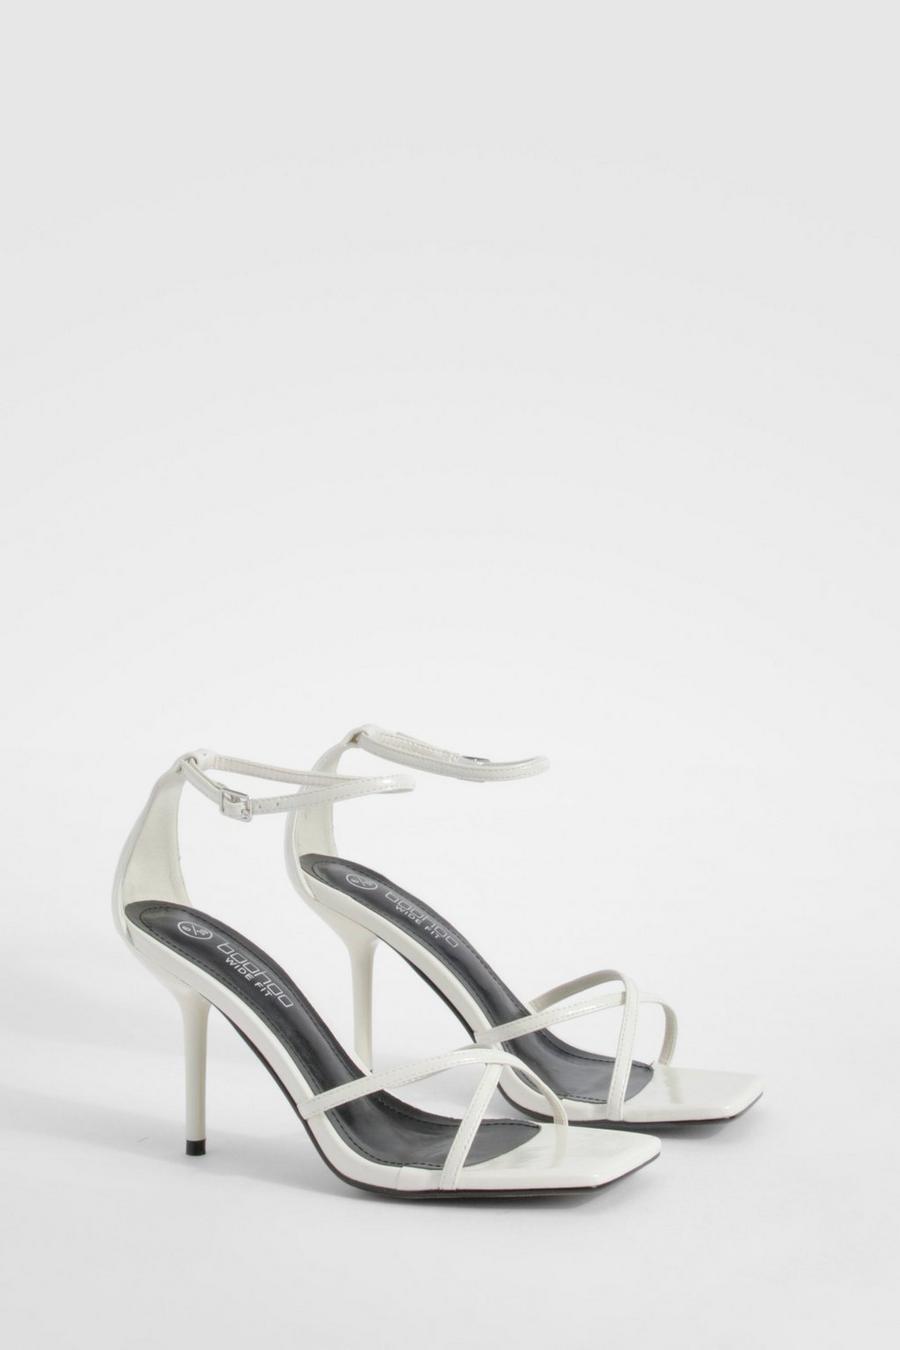 Off white Wide Width Stiletto Crossover Barely There Heels